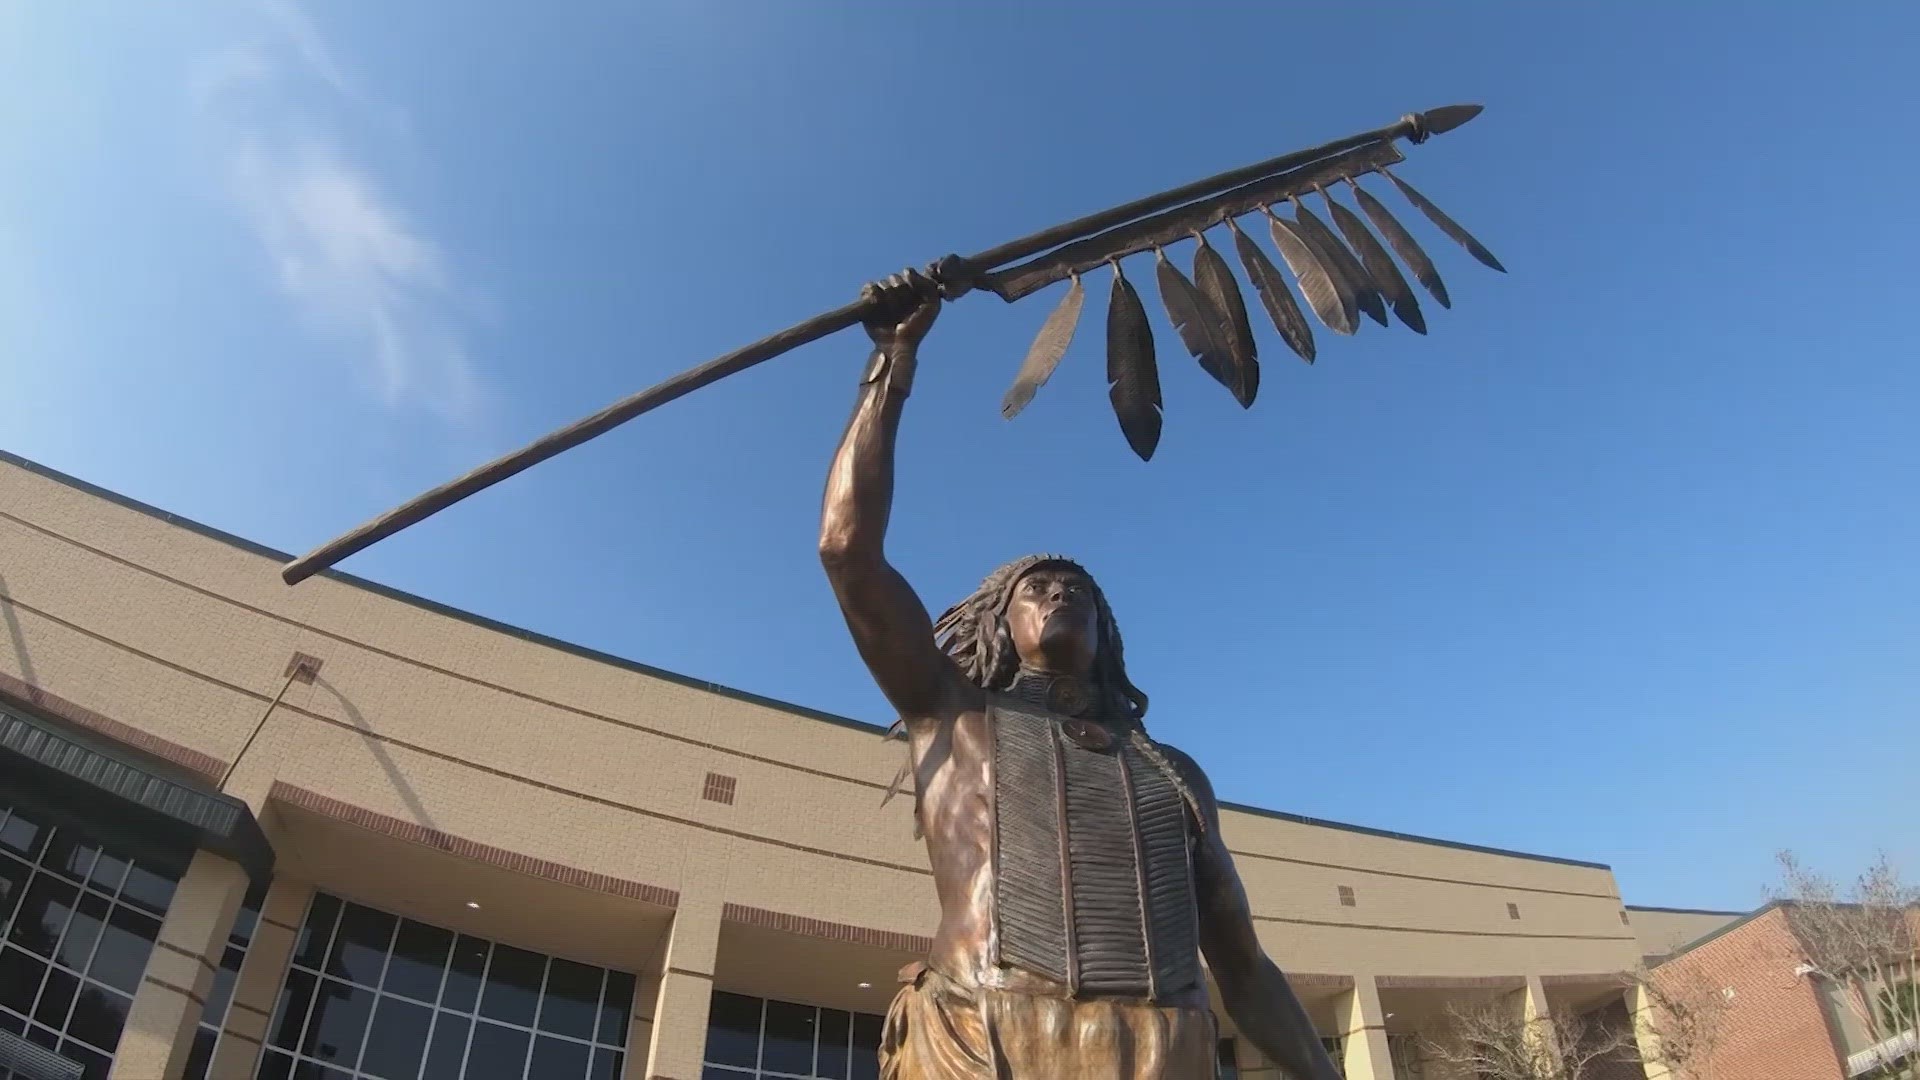 A 12-foot tall bronze statue was unveiled in front of Santa Fe High School Thursday afternoon. It's called "Warrior Spirit" and honors the 10 lives lost.